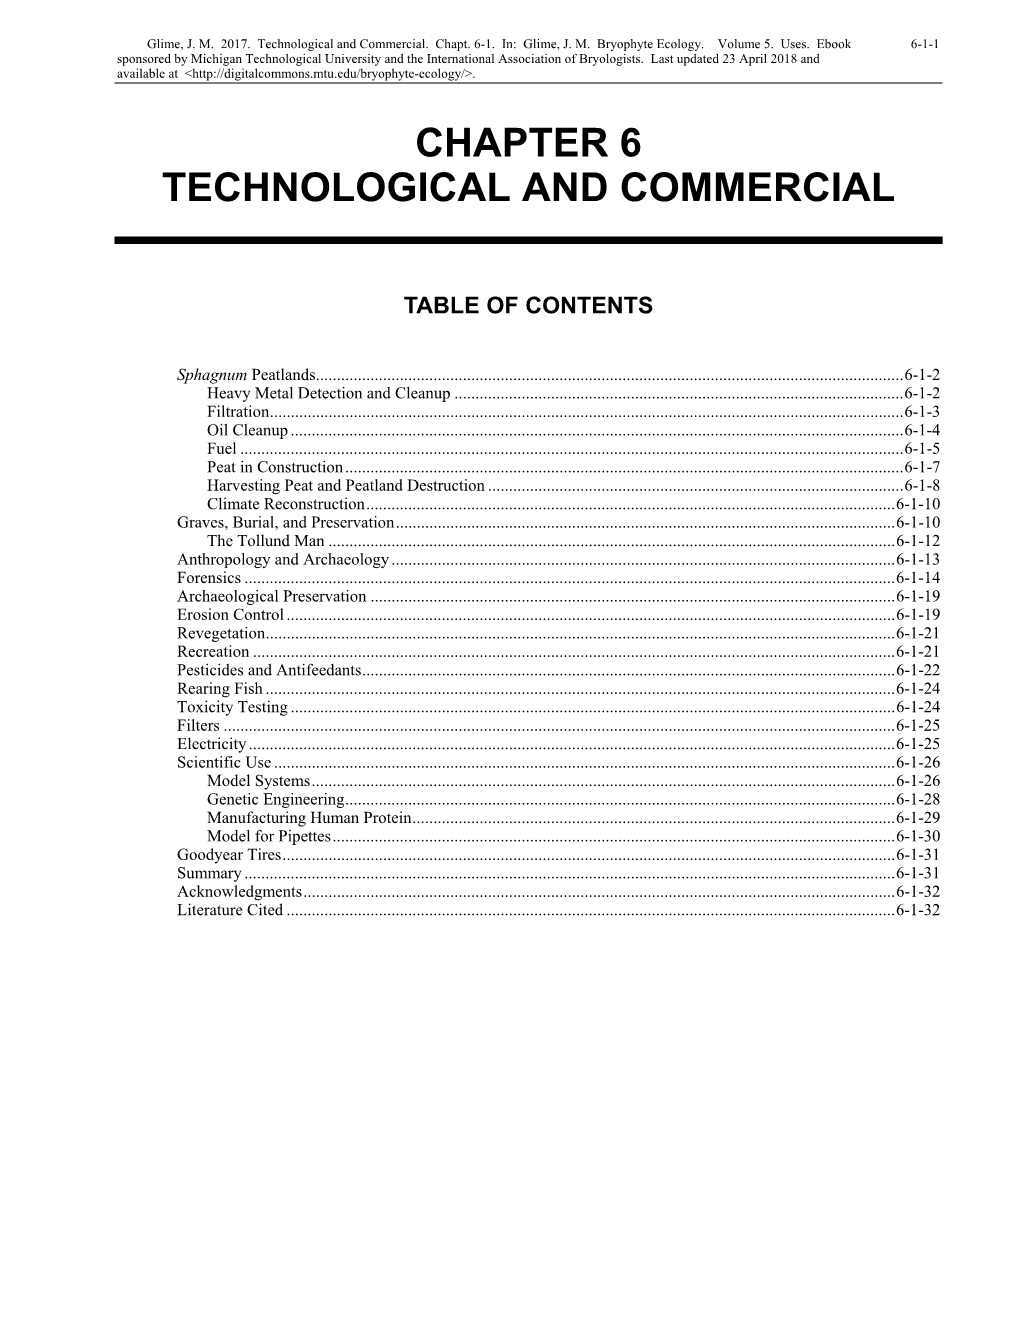 Volume 5, Chapter 6: Technological and Commercial